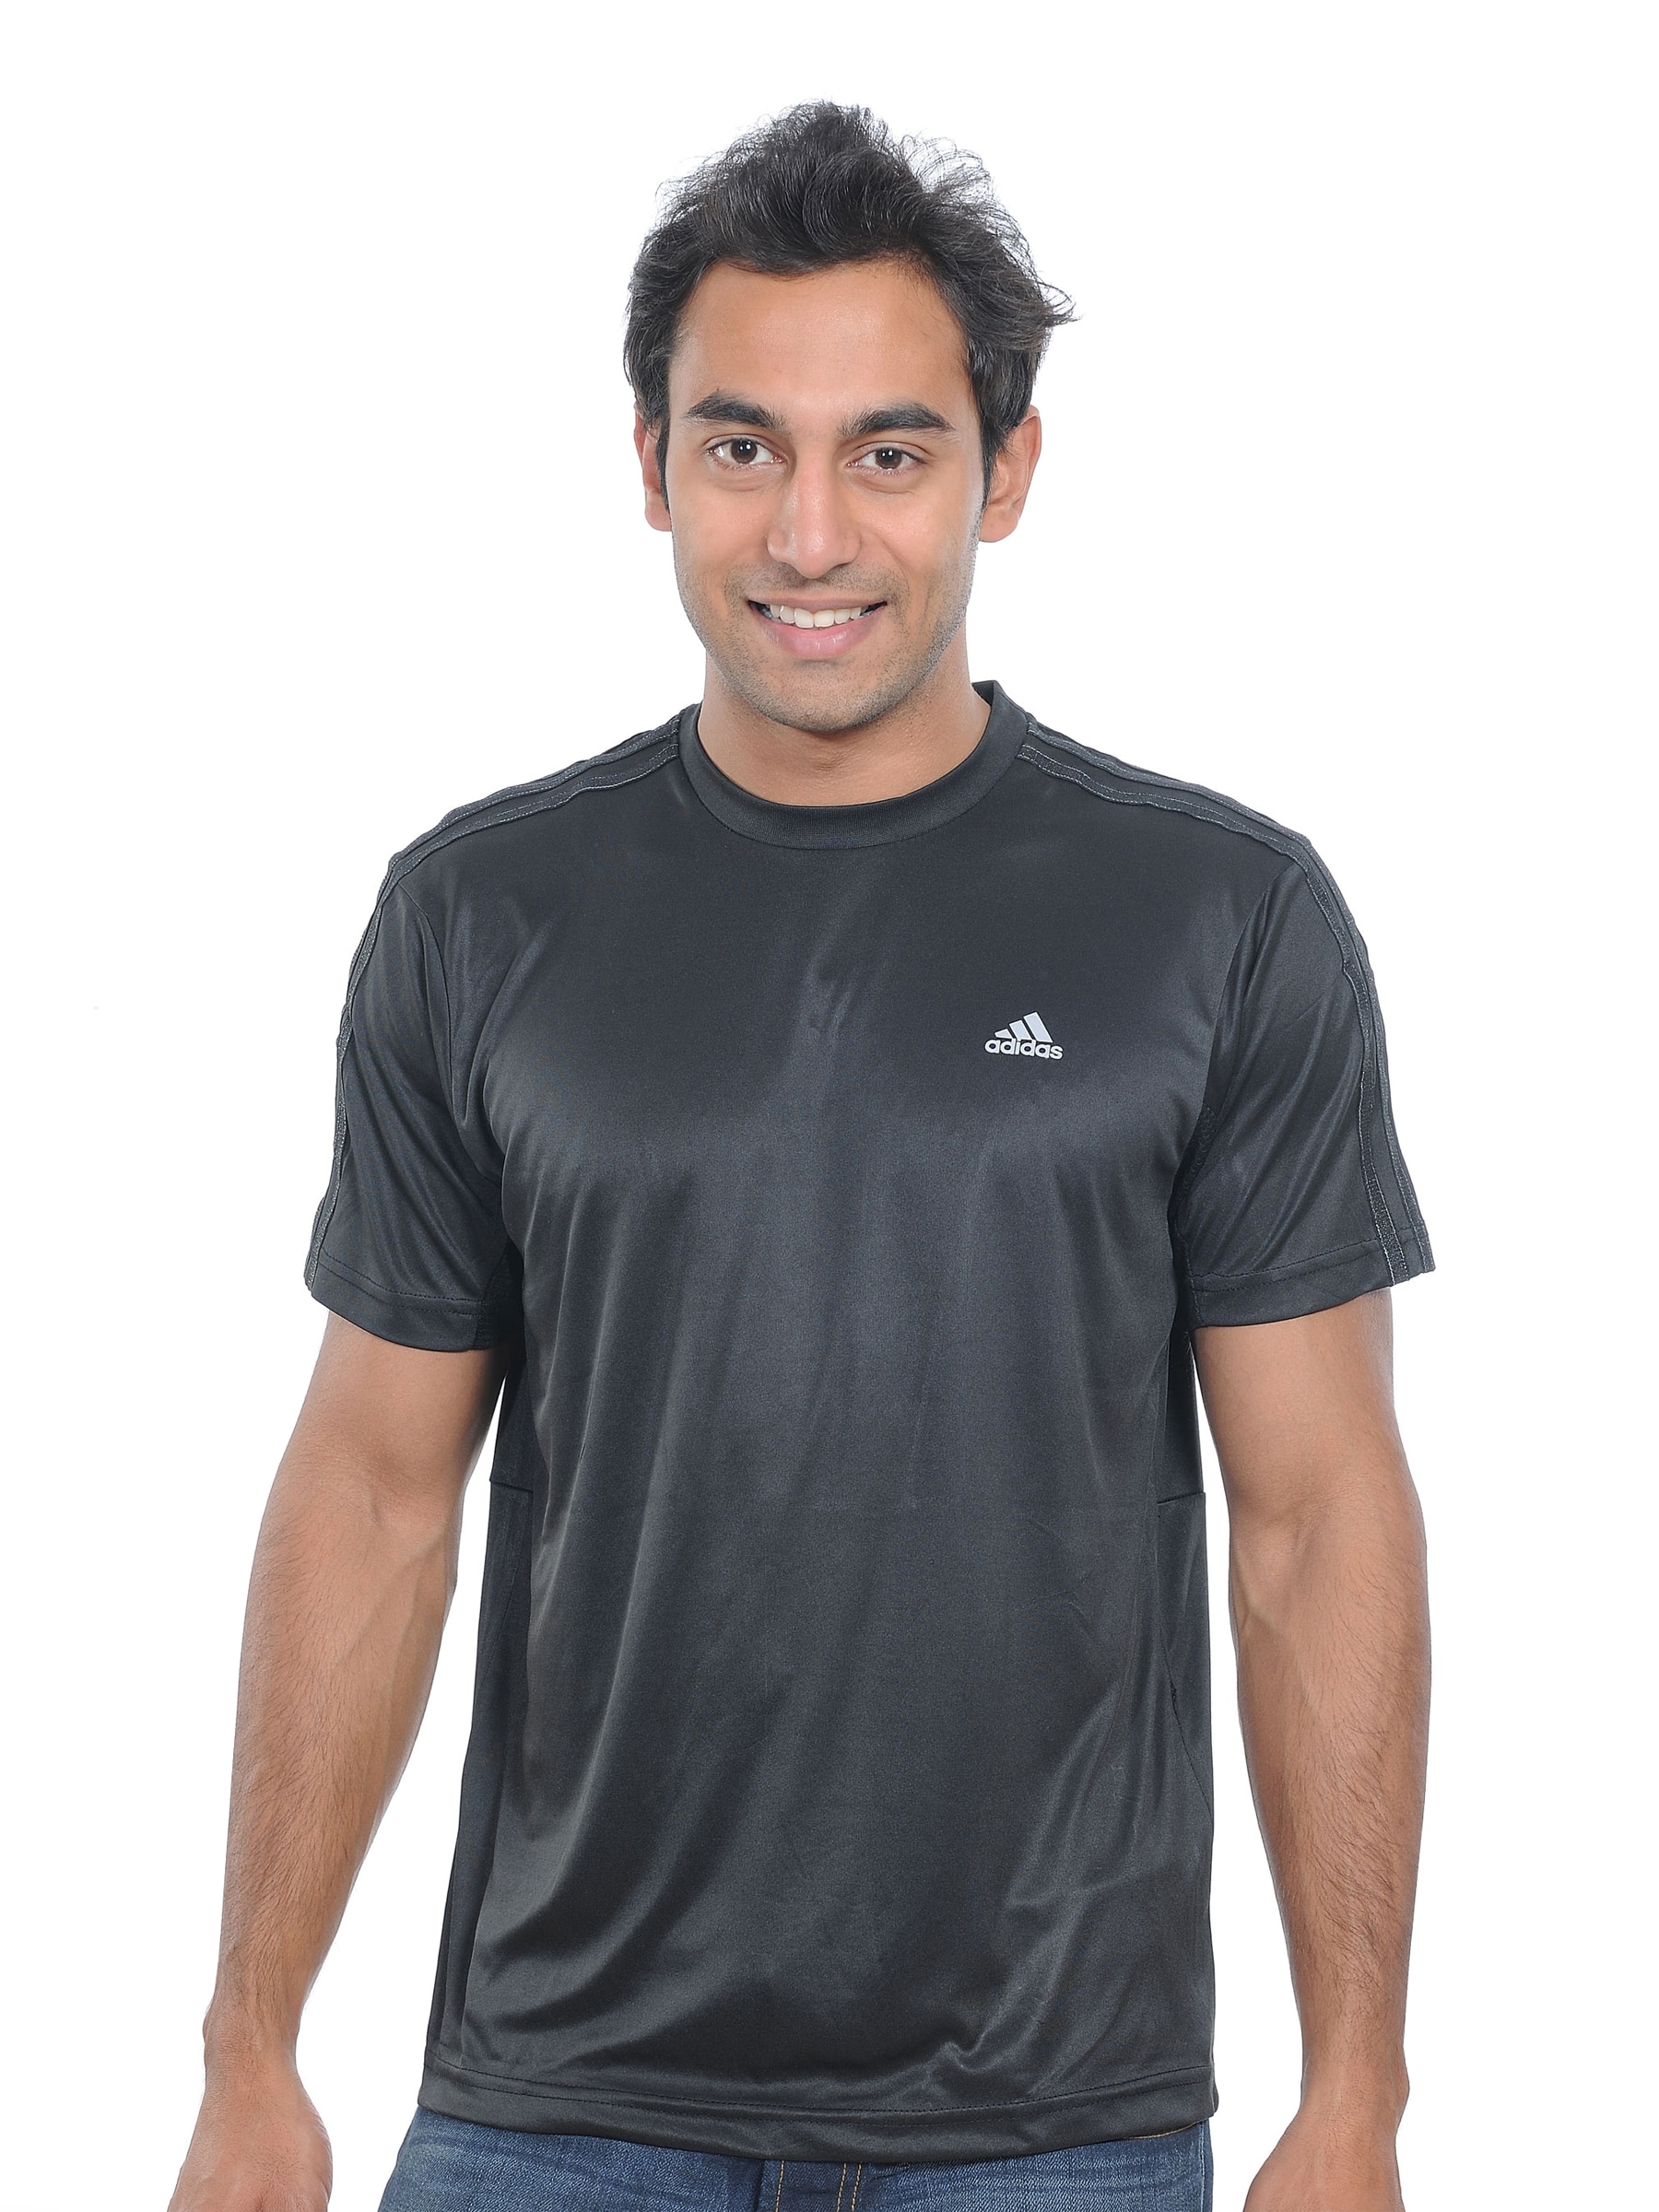 ADIDAS Mens Fitted Black T-shirt